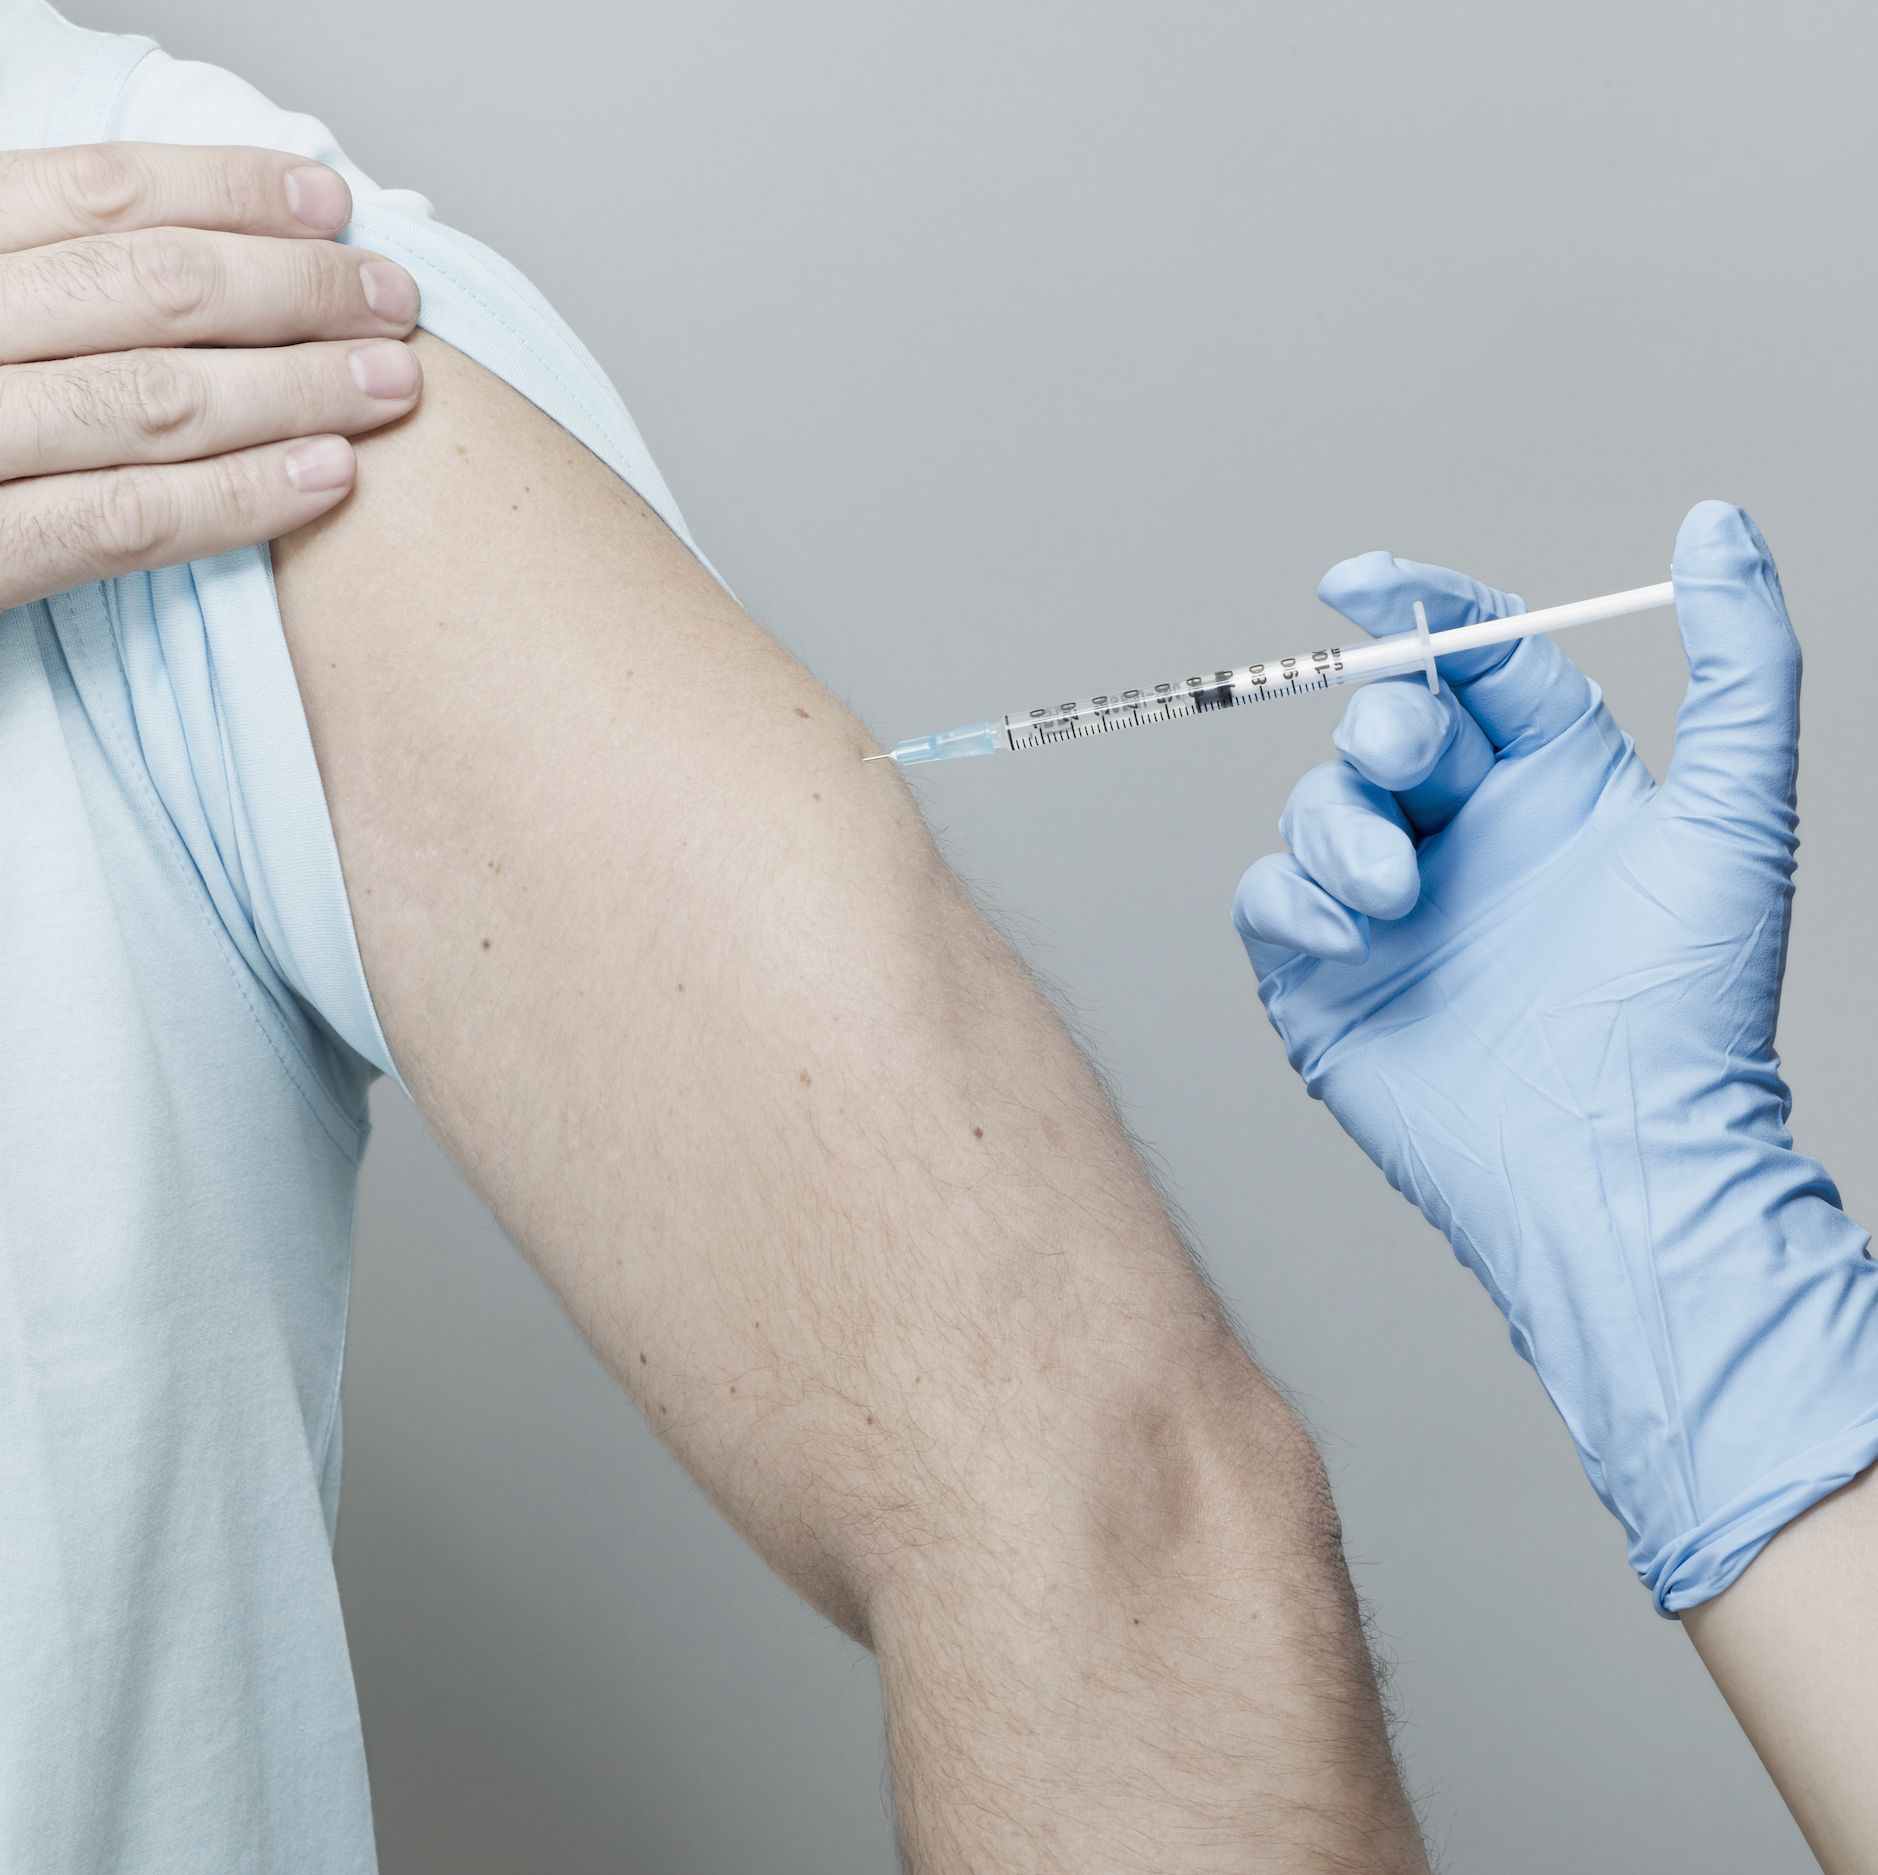 HPV Is Putting Men at Risk of Cancer. So Why Aren't They Getting the Vaccine?